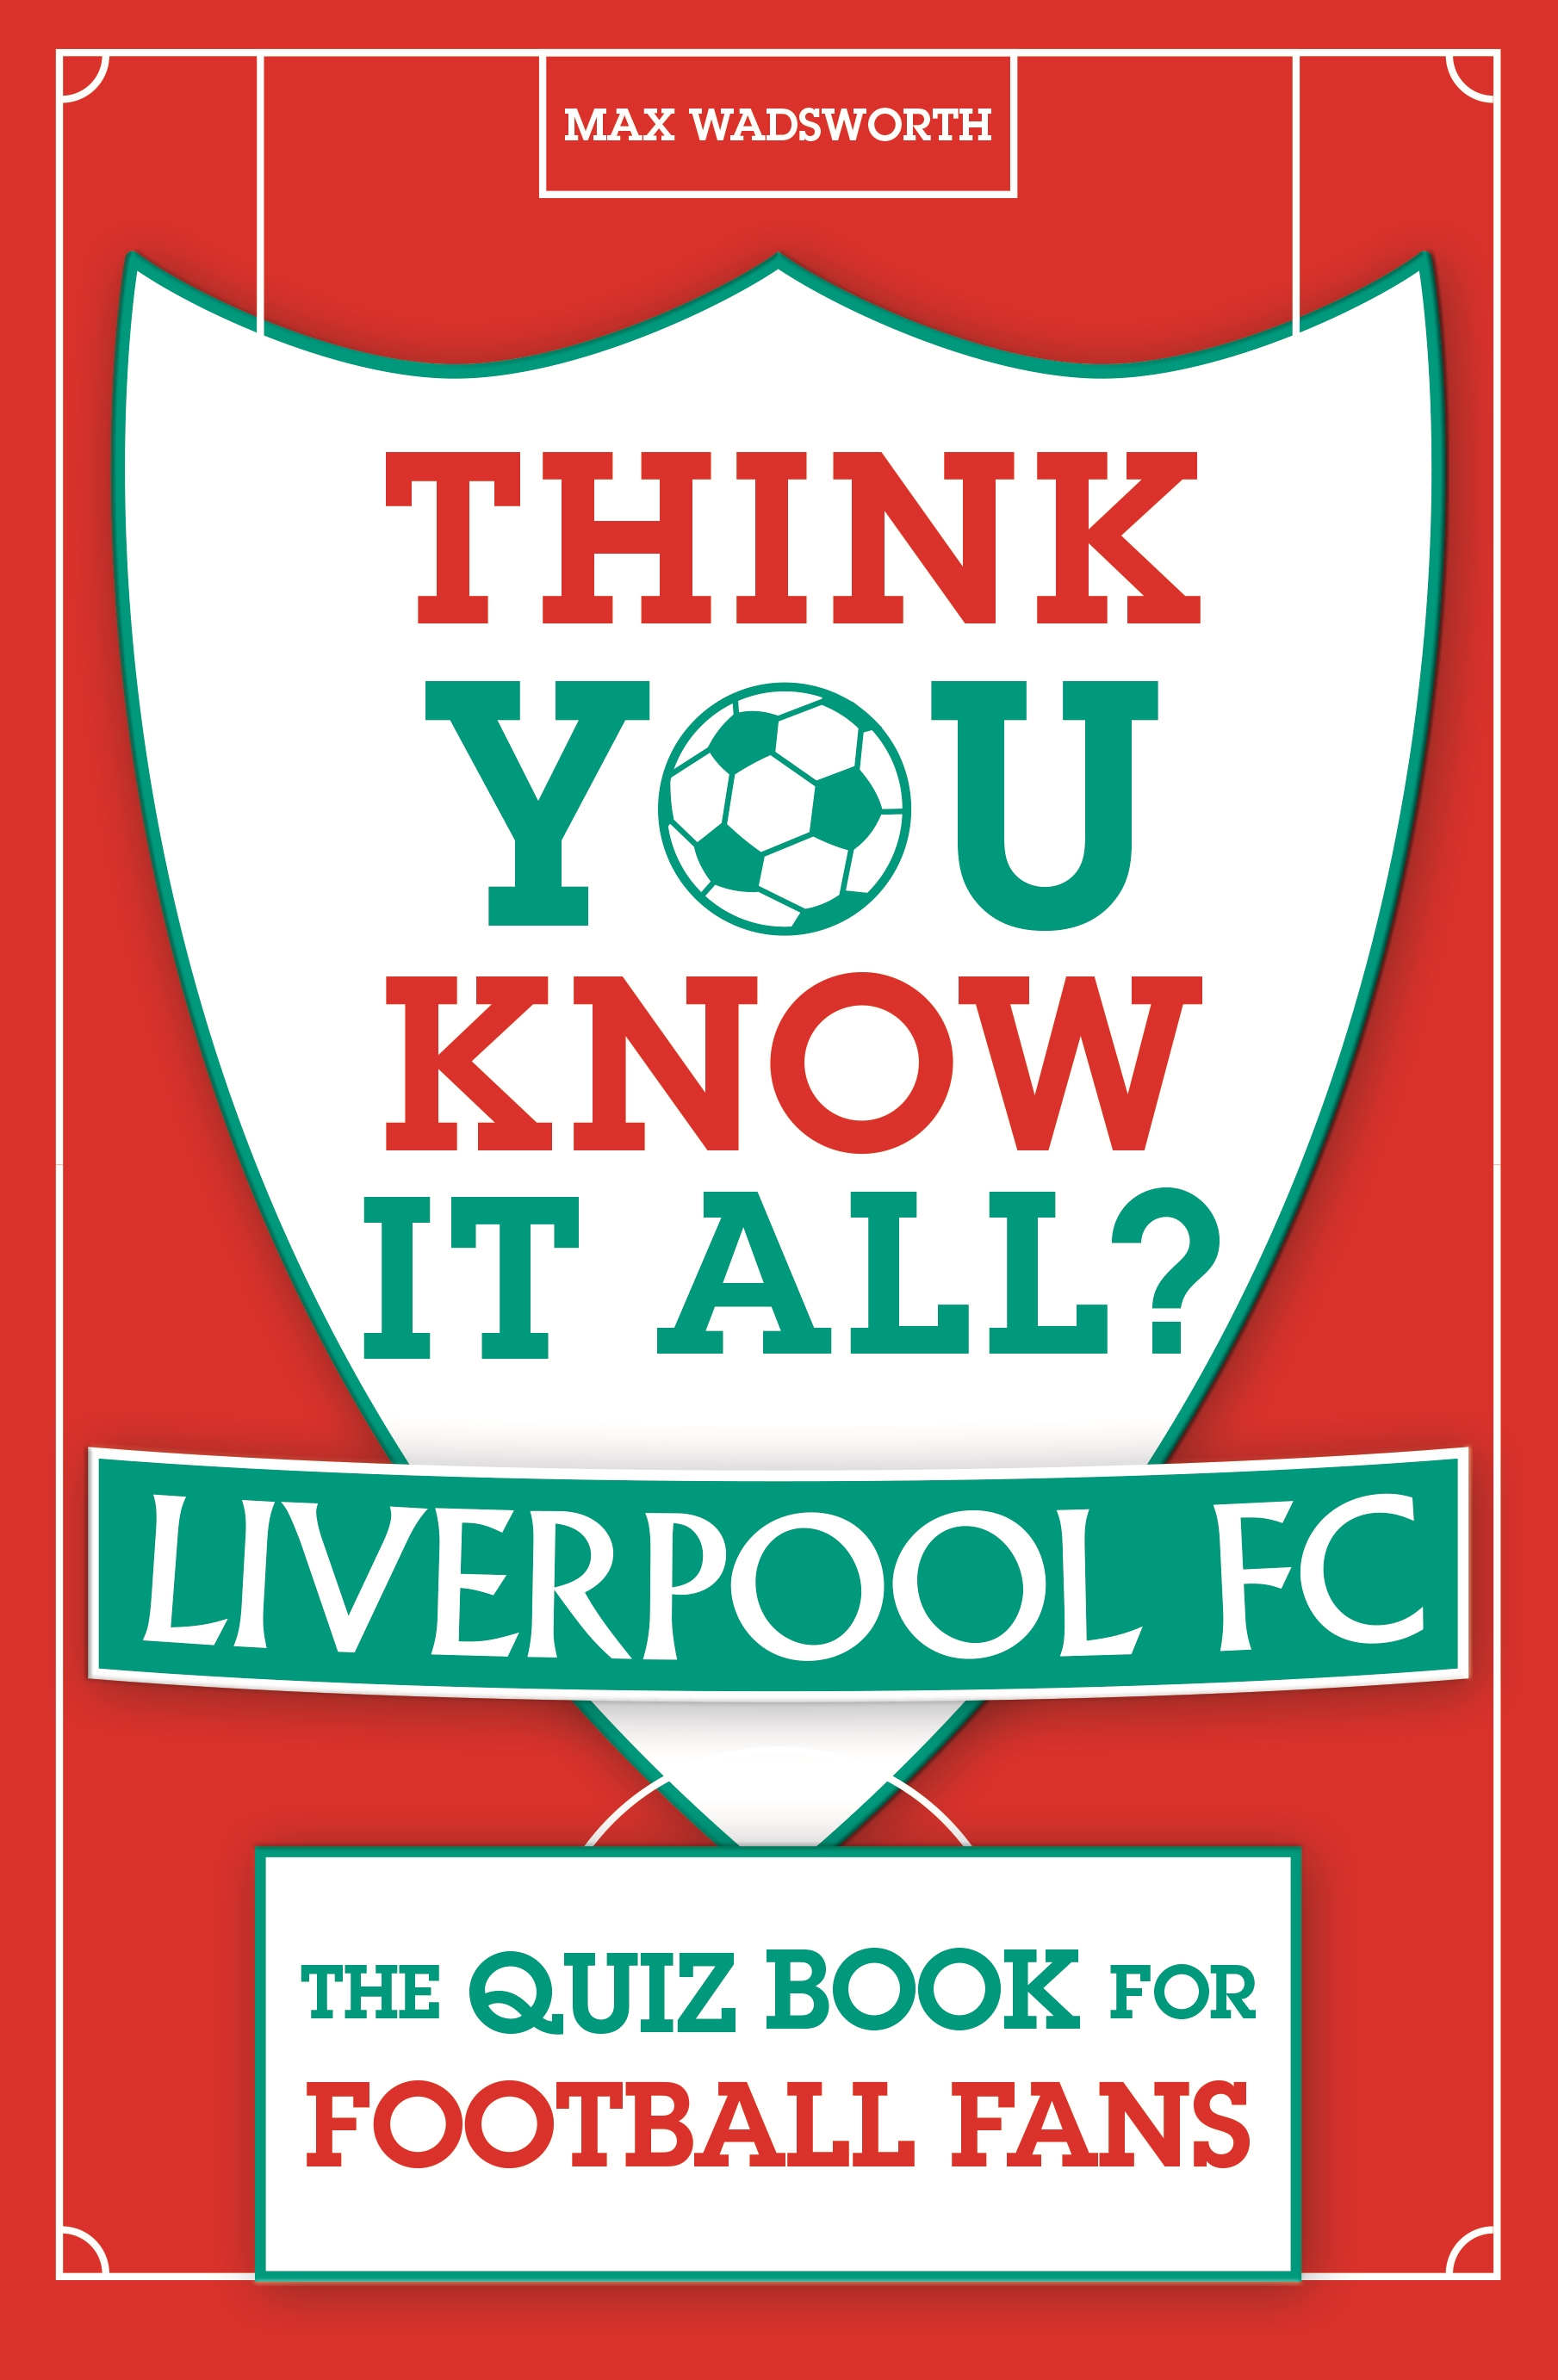 Think You Know It All? Liverpool FC